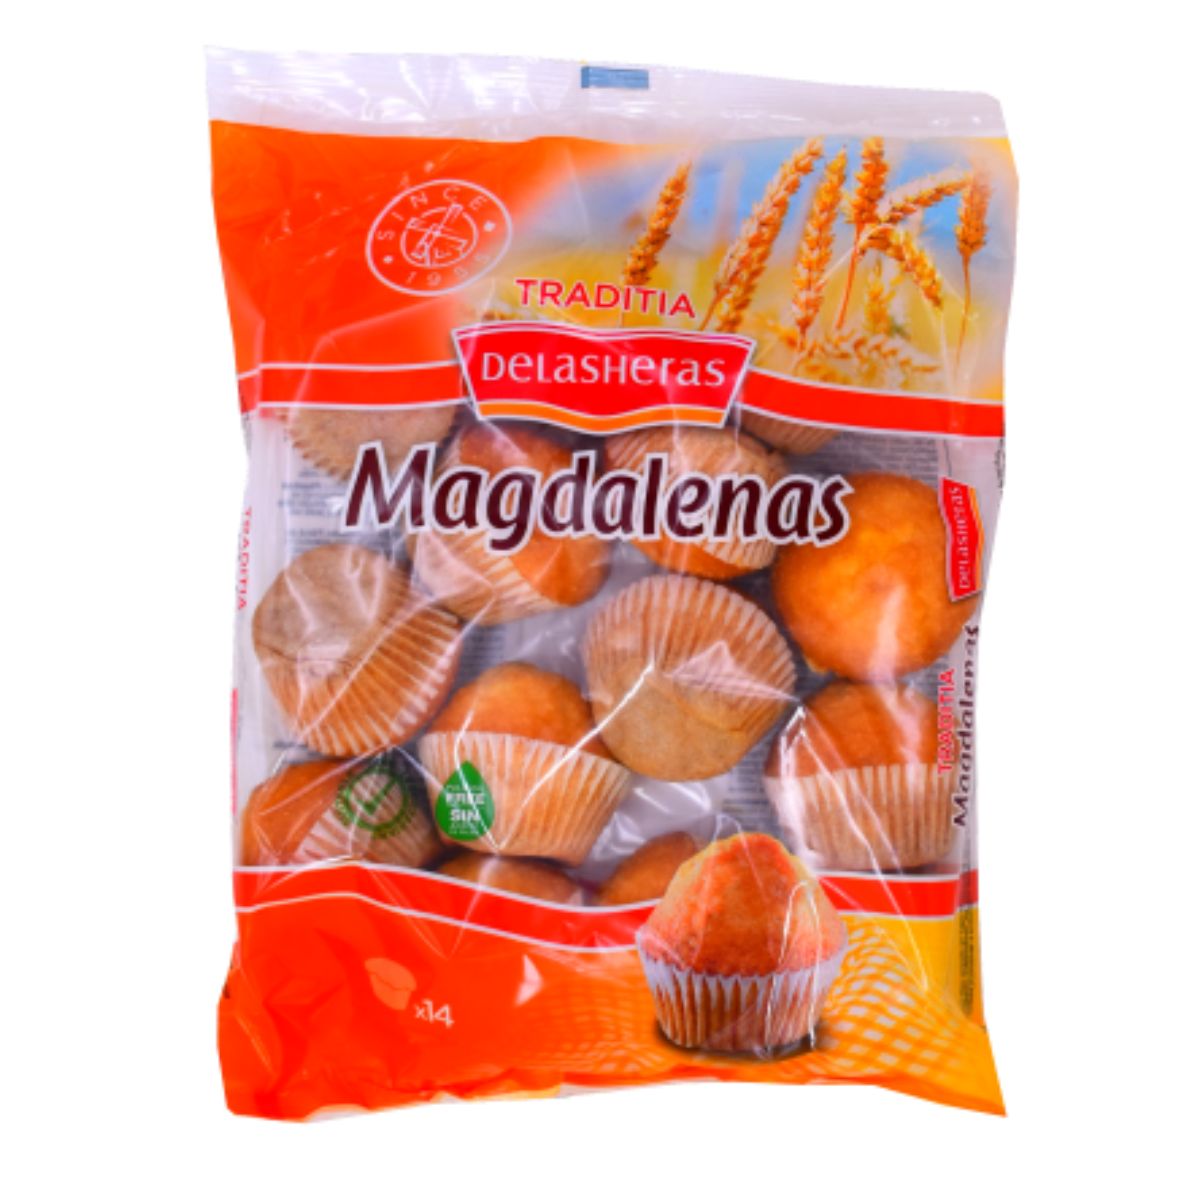 A package of Traditia Delasheras - Magdalenas - 350g, containing 14 sponge cakes, with a clear display of the product against a white background.